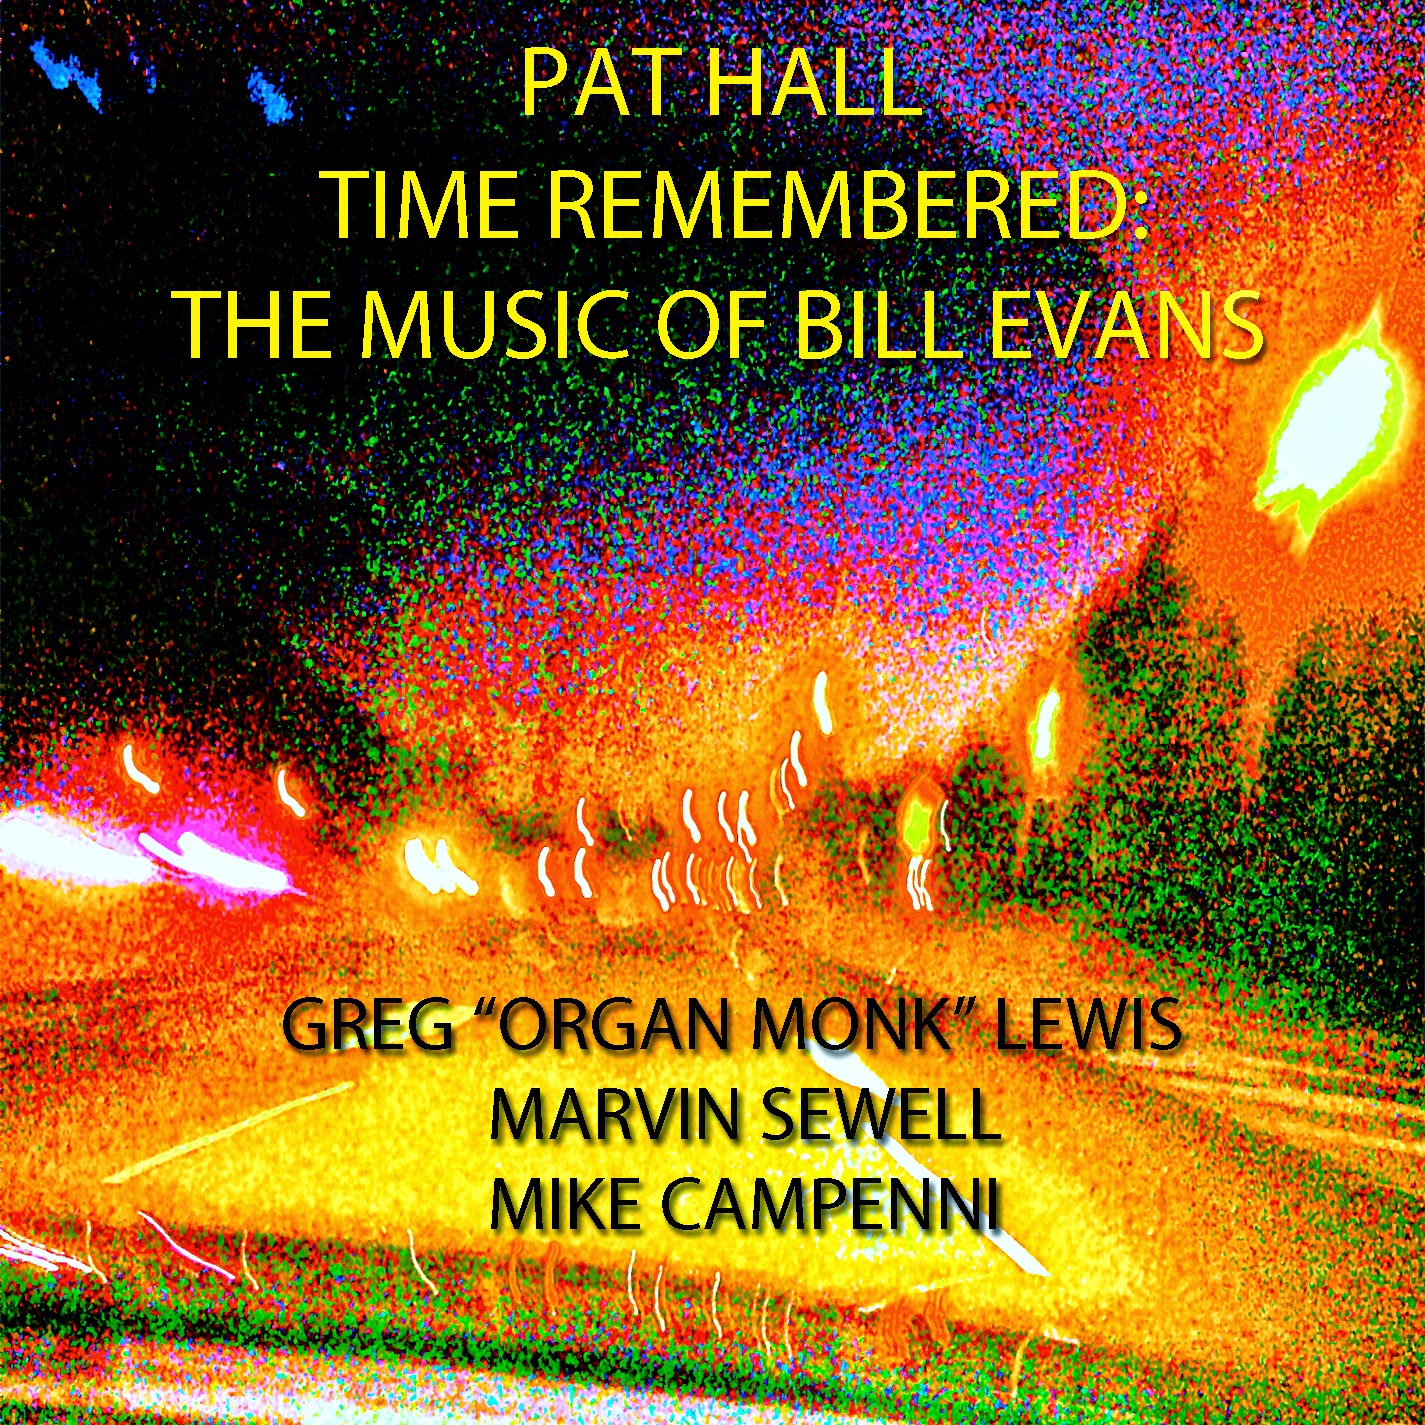 Time_Remembered_Pat_Hall